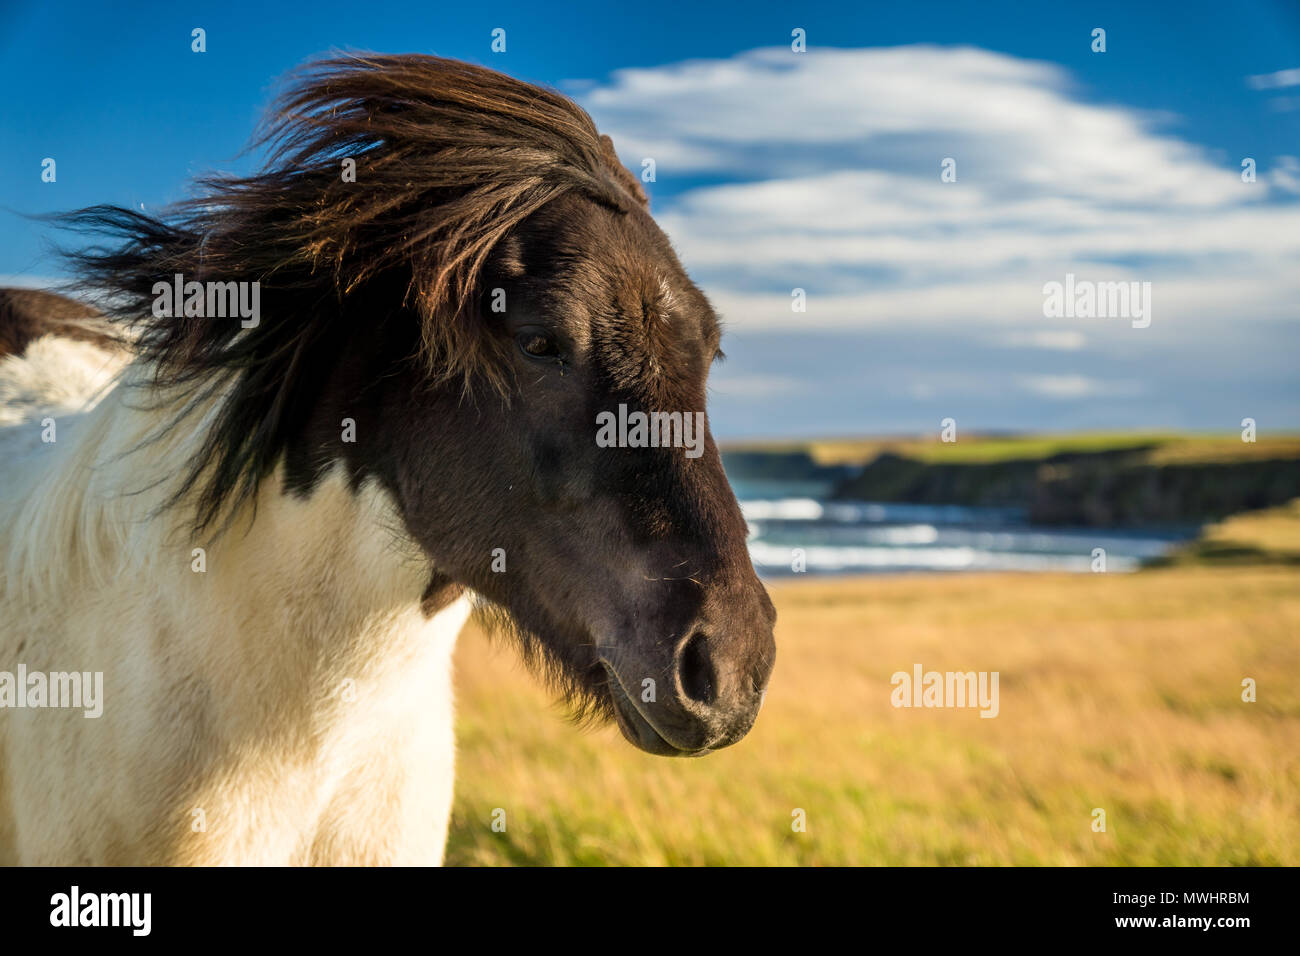 icelandic horse in windy conditions Stock Photo